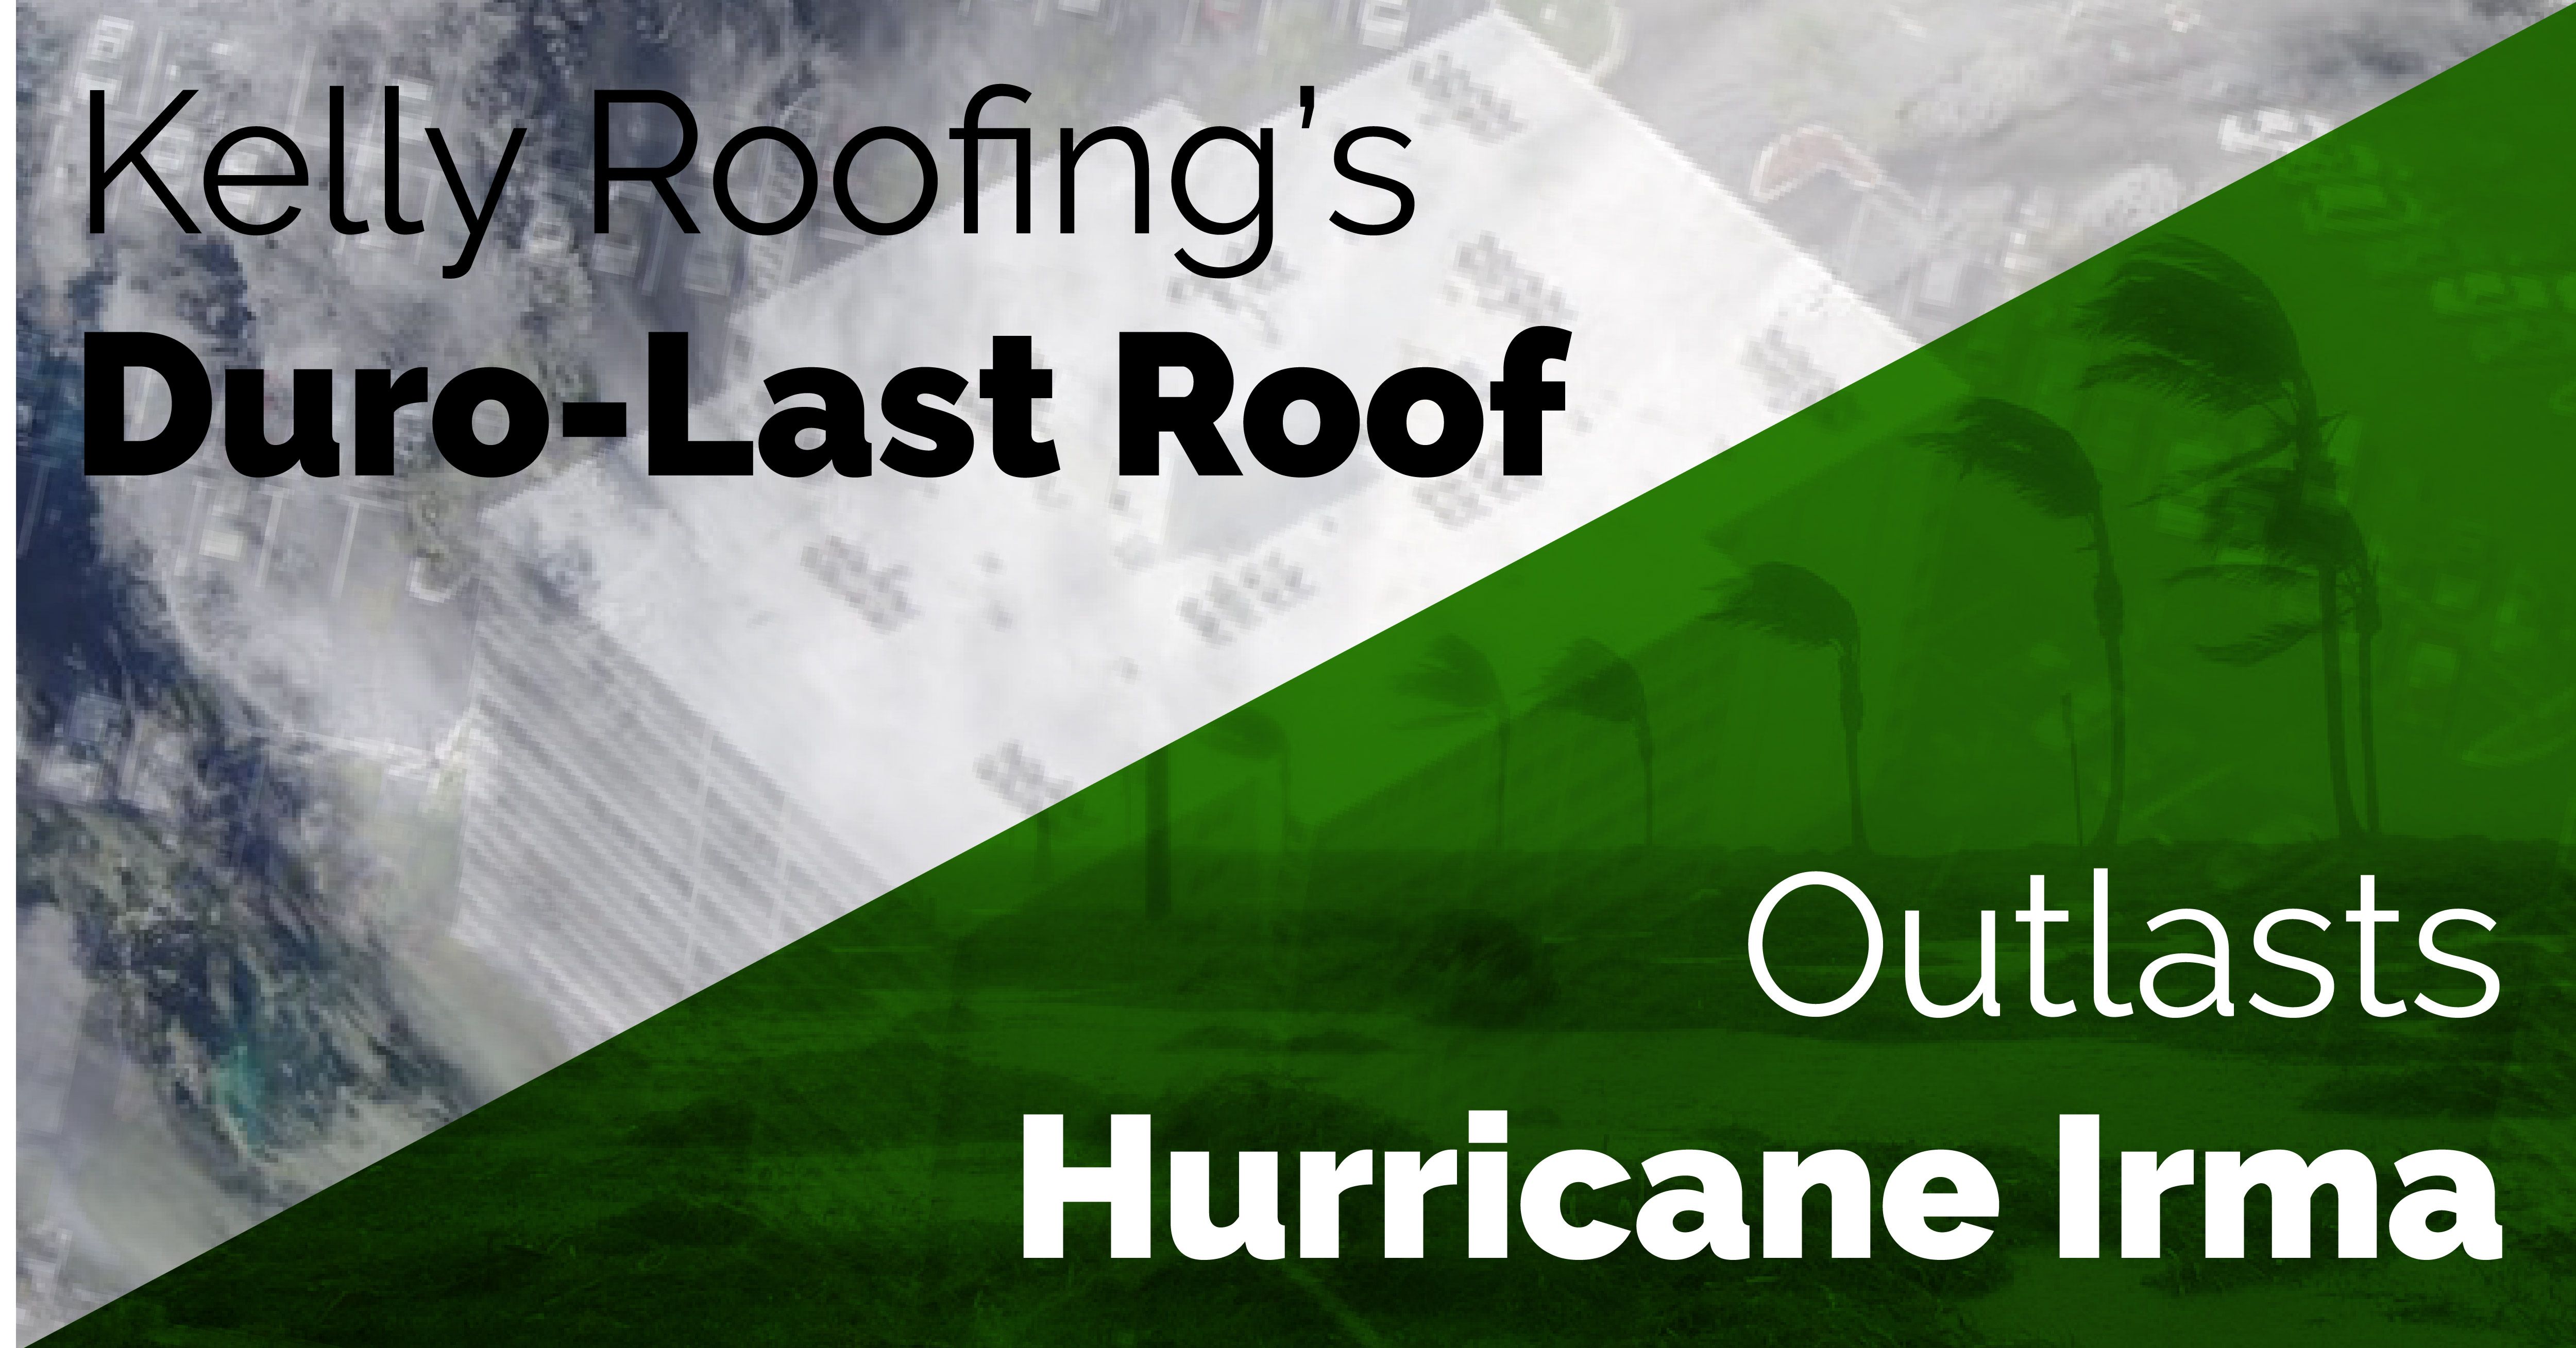 Kelly Roofing Duro-Last Roof Stays in Mint Condition Through Hurricane Irma